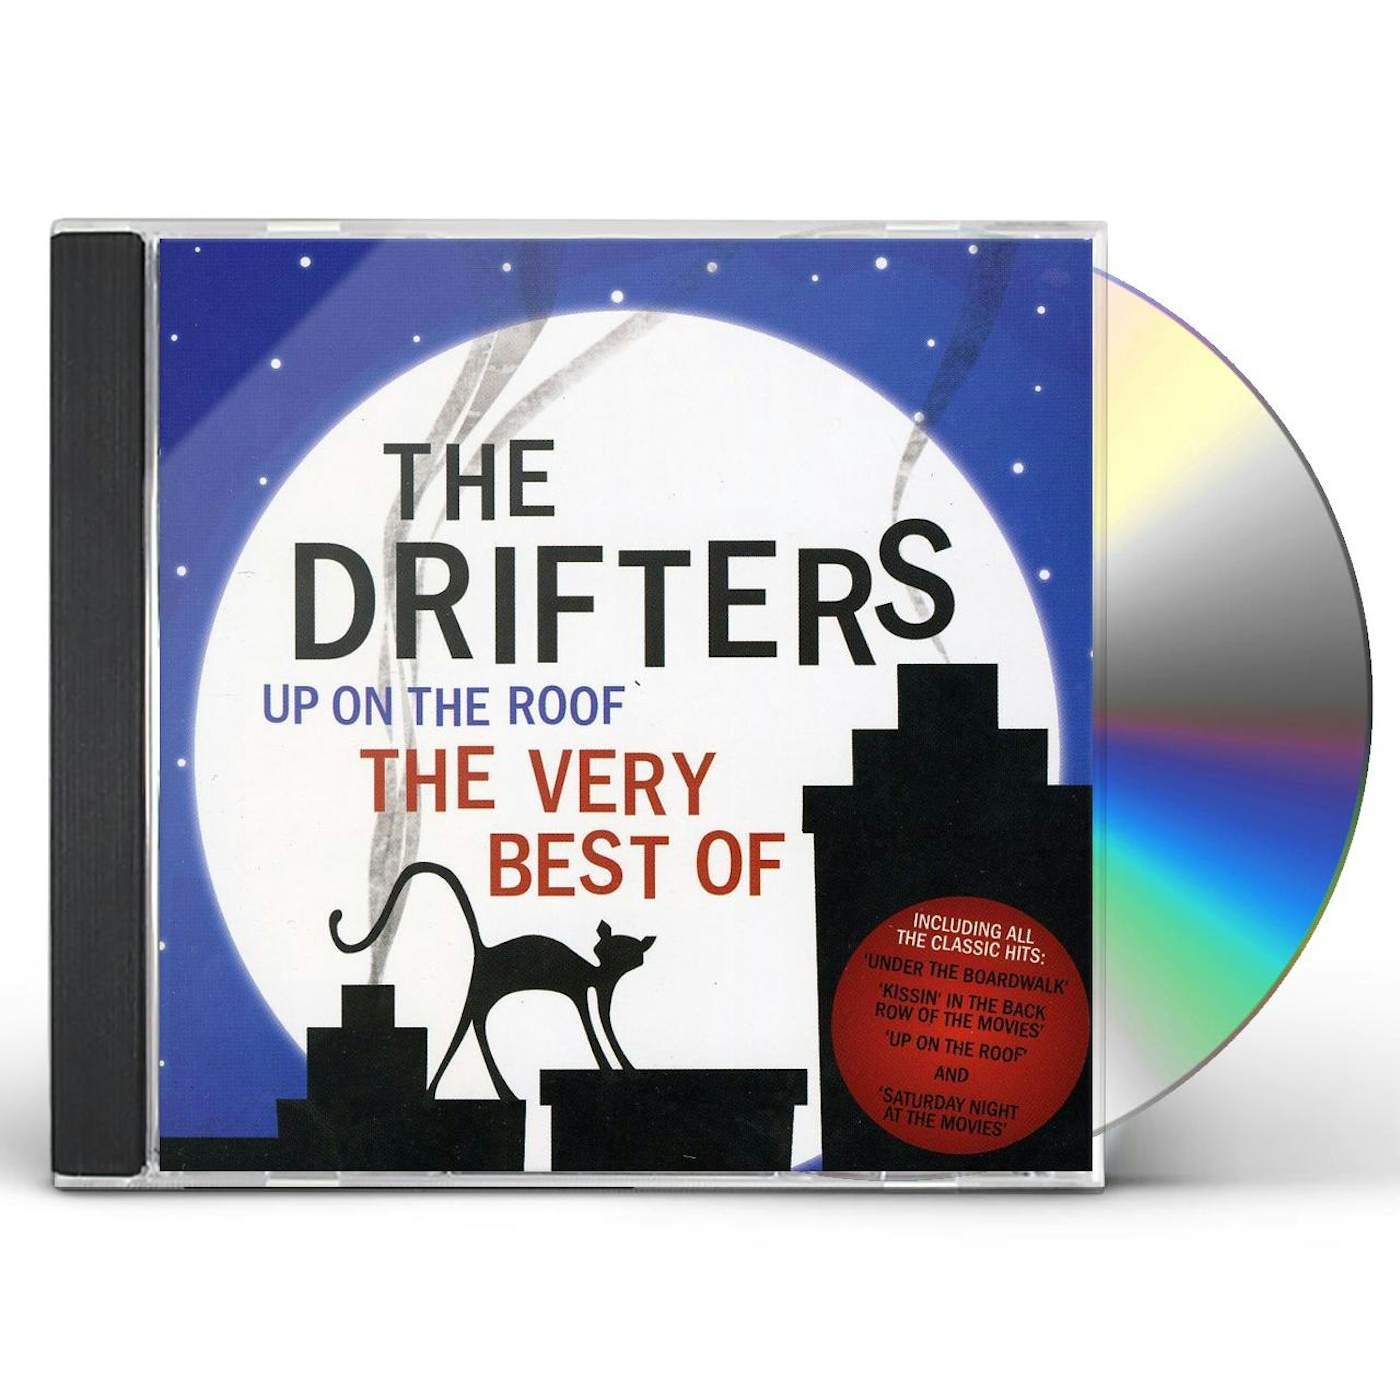 The Drifters UP ON THE ROOF: VERY BEST CD